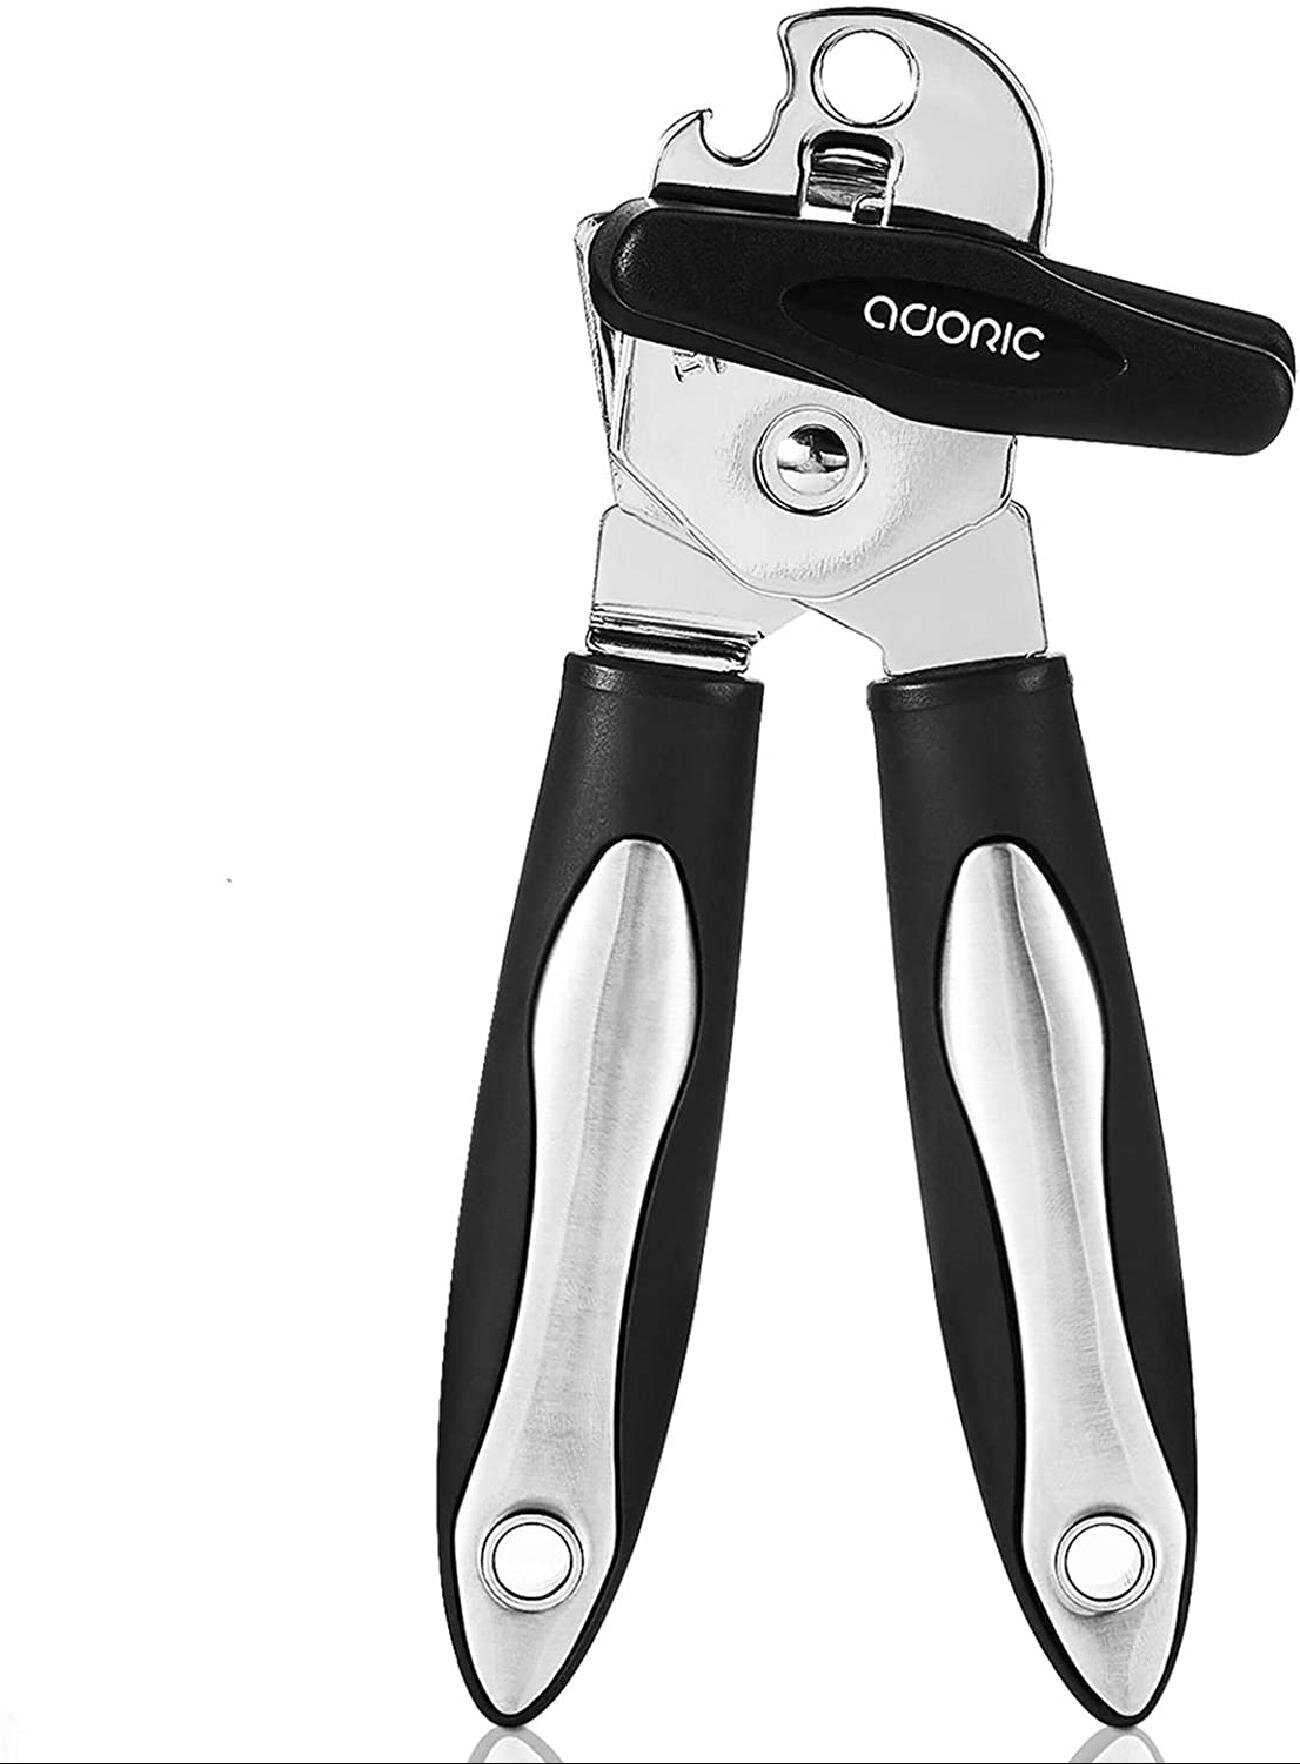 Zulay Kitchen Soft Edge Can Opener With Stainless Steel Blades and